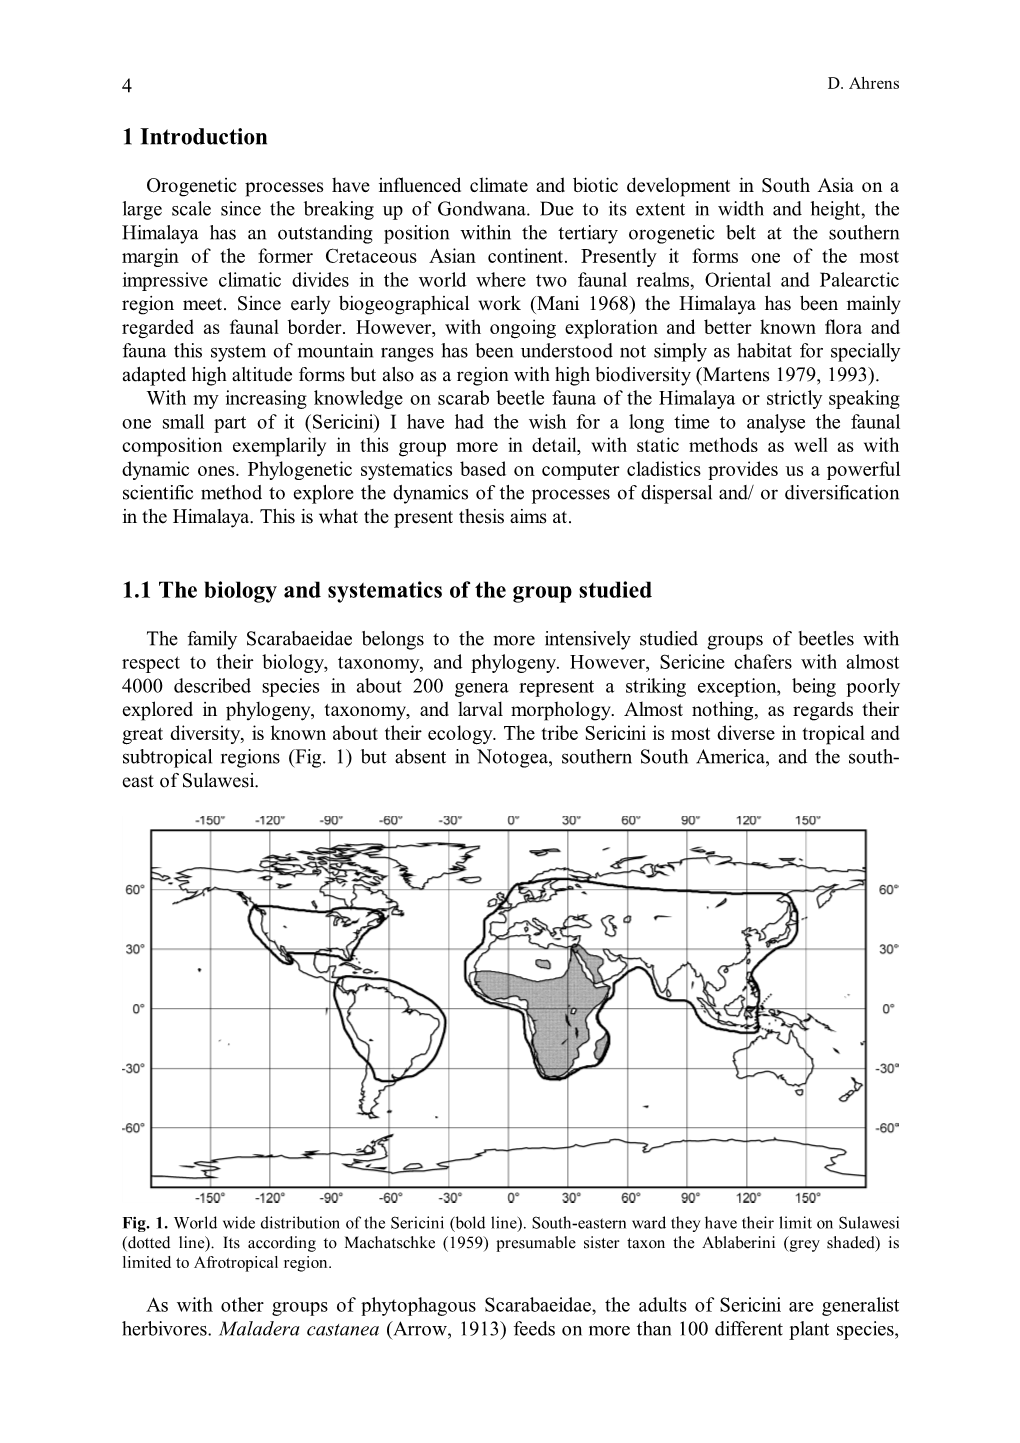 1 Introduction 1.1 the Biology and Systematics of the Group Studied